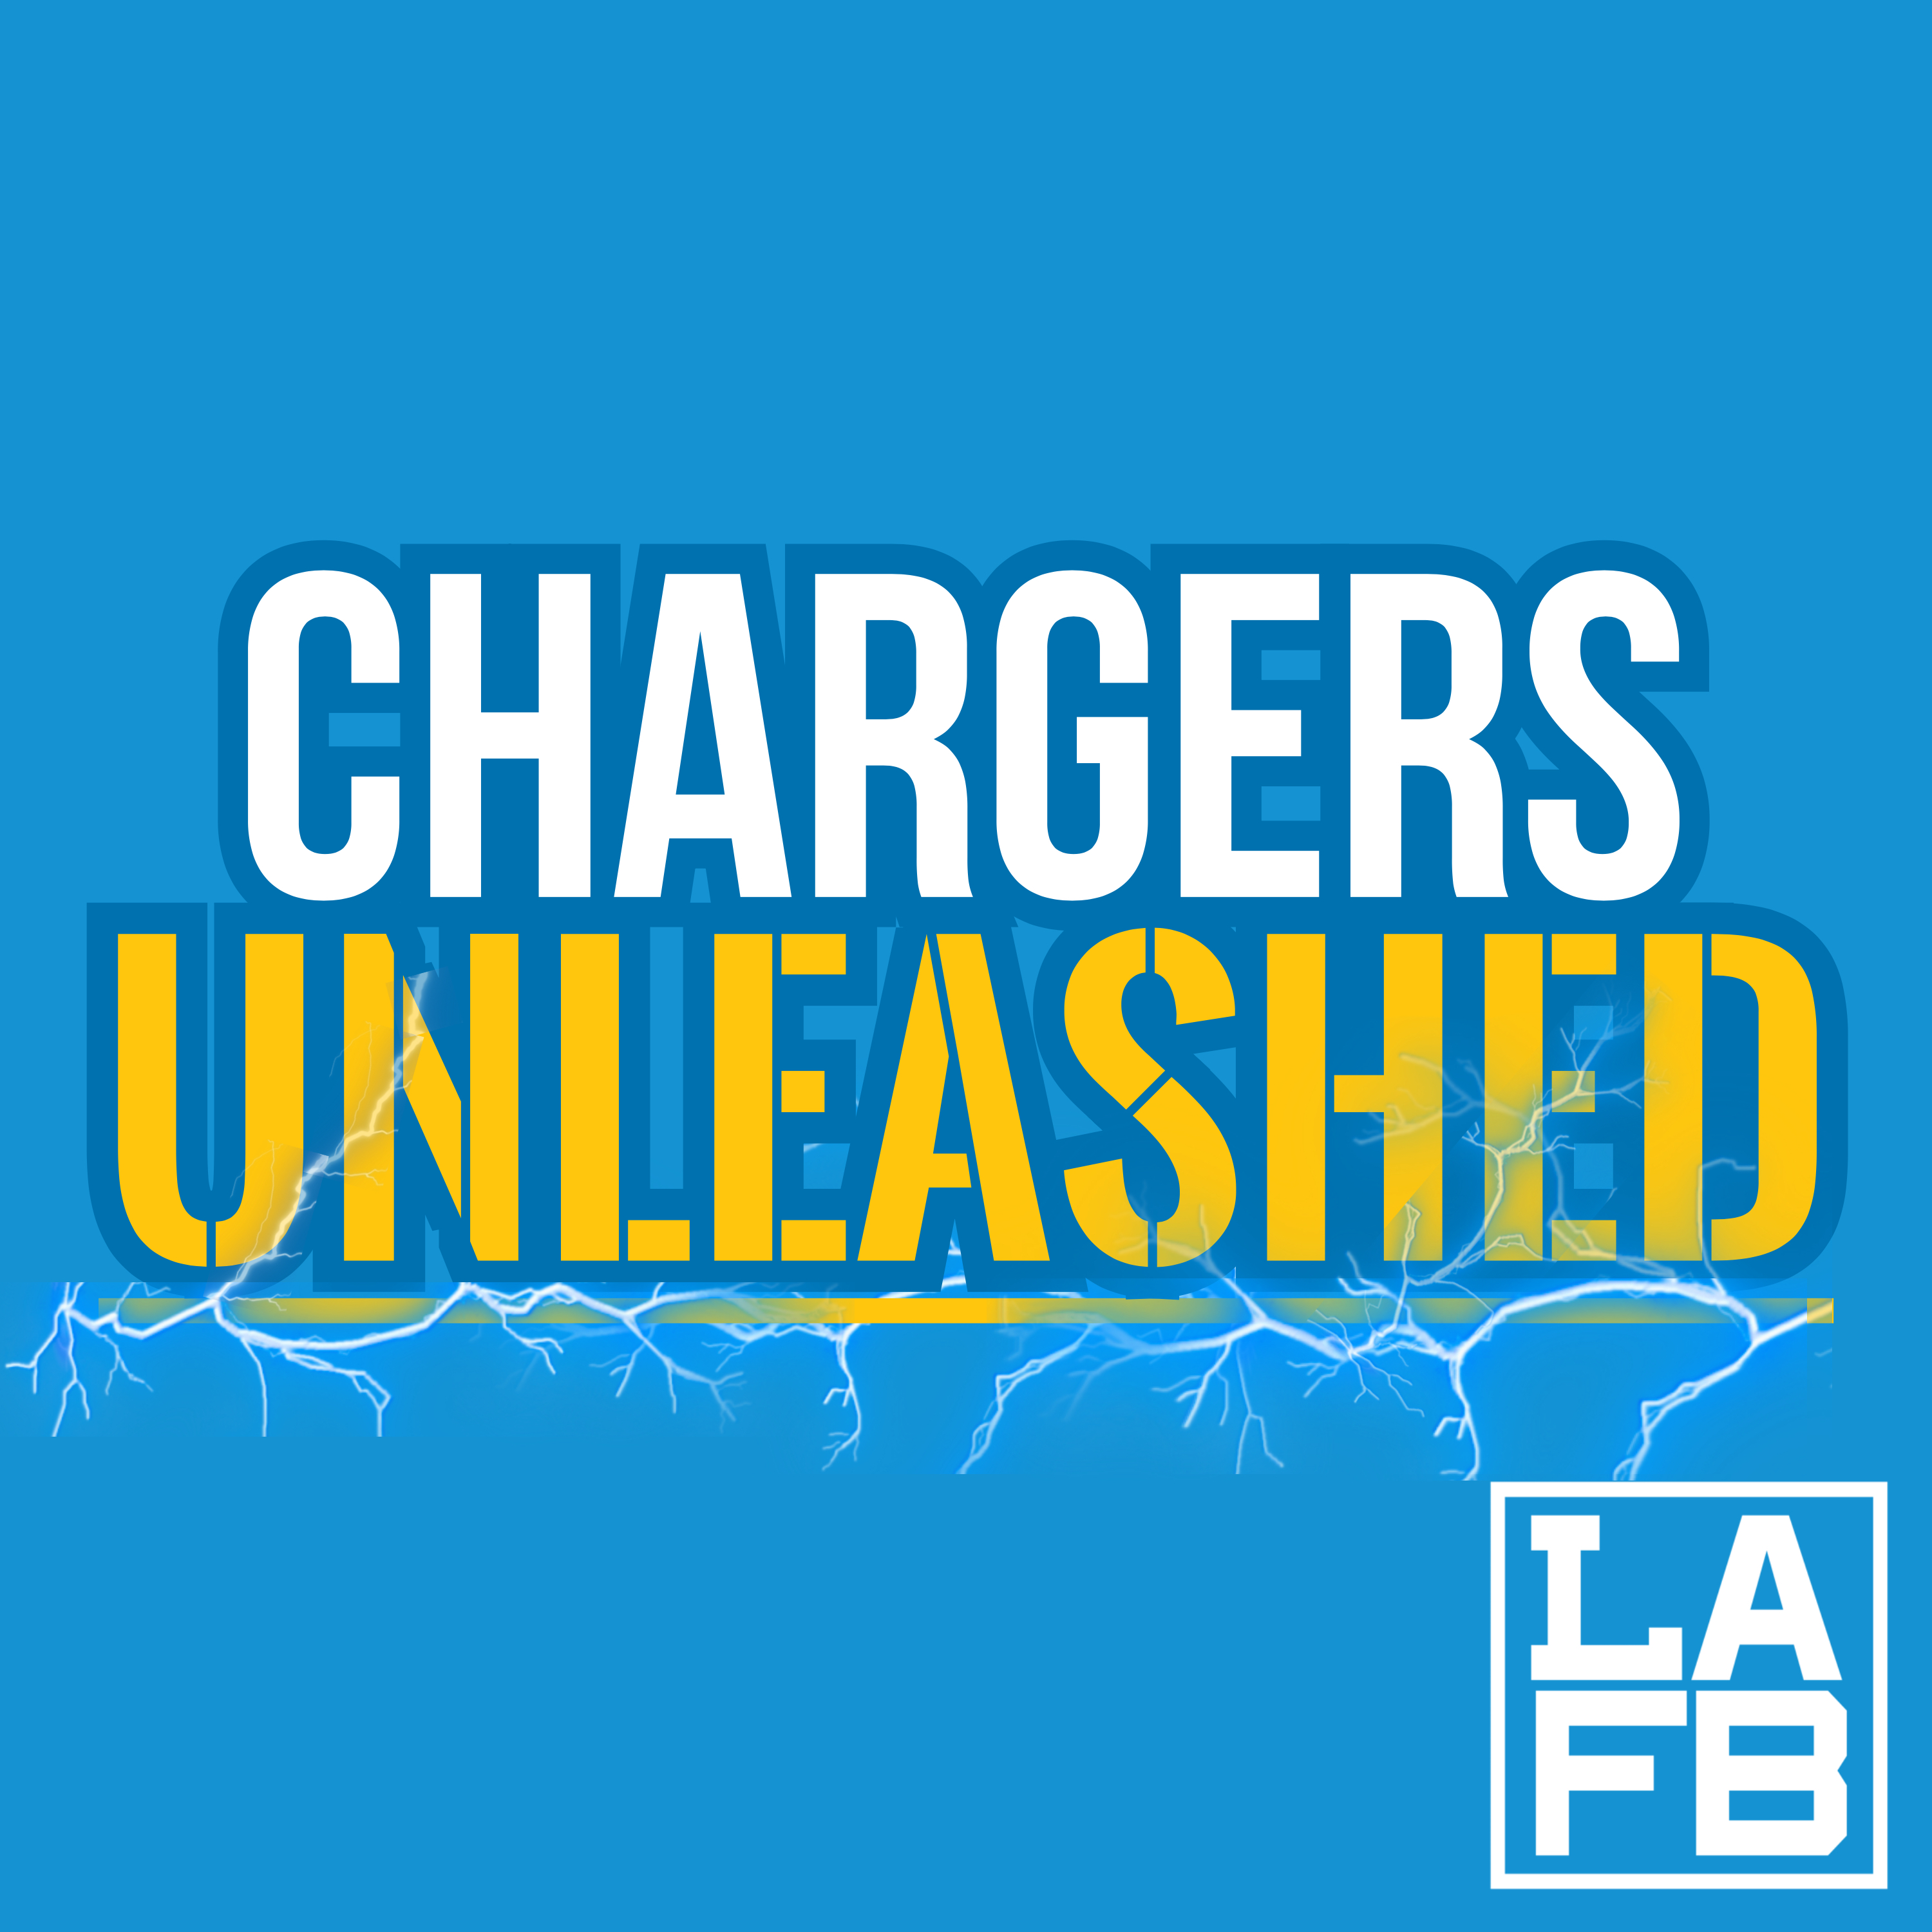 Ep. 256 - Chargers vs Titans Week 2 Recap & Takeaways | Lack of Consistency & Finish Dooms Chargers Again